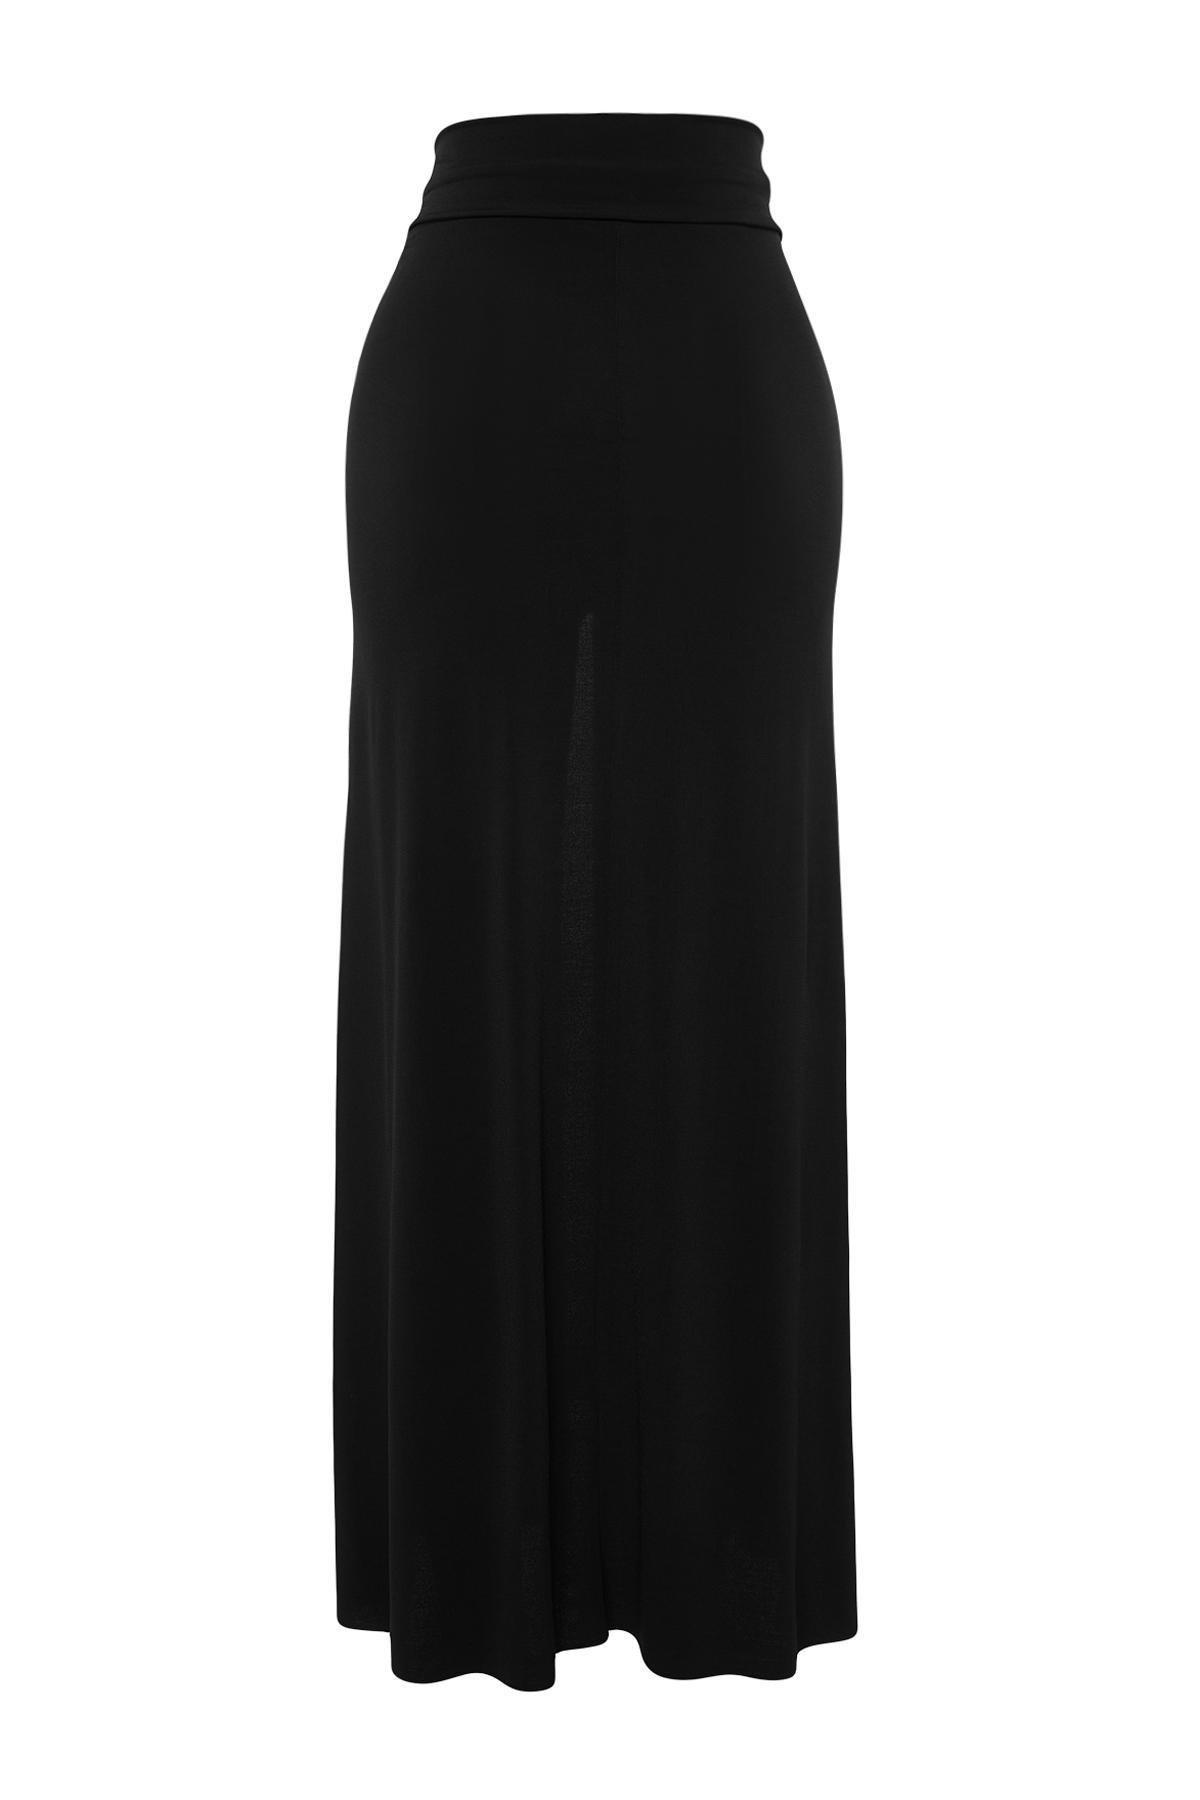 Trendyol - Black Maxi Knitted Cut Out/Windowed Pareo